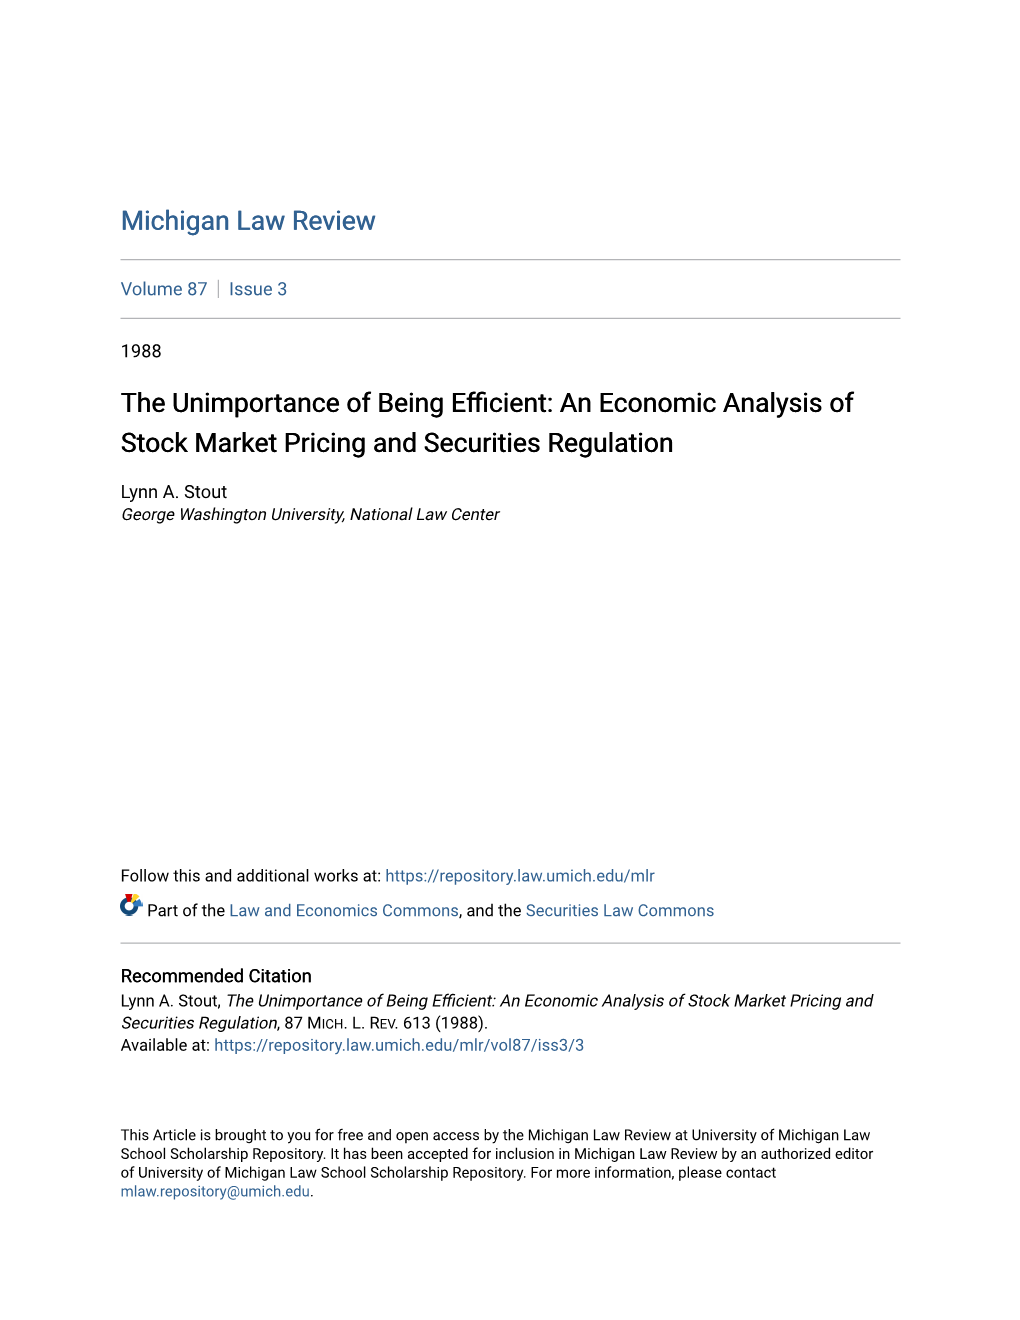 AN ECONOMIC ANALYSIS of STOCK MARKET PRICING and SECURITIES Regulationt